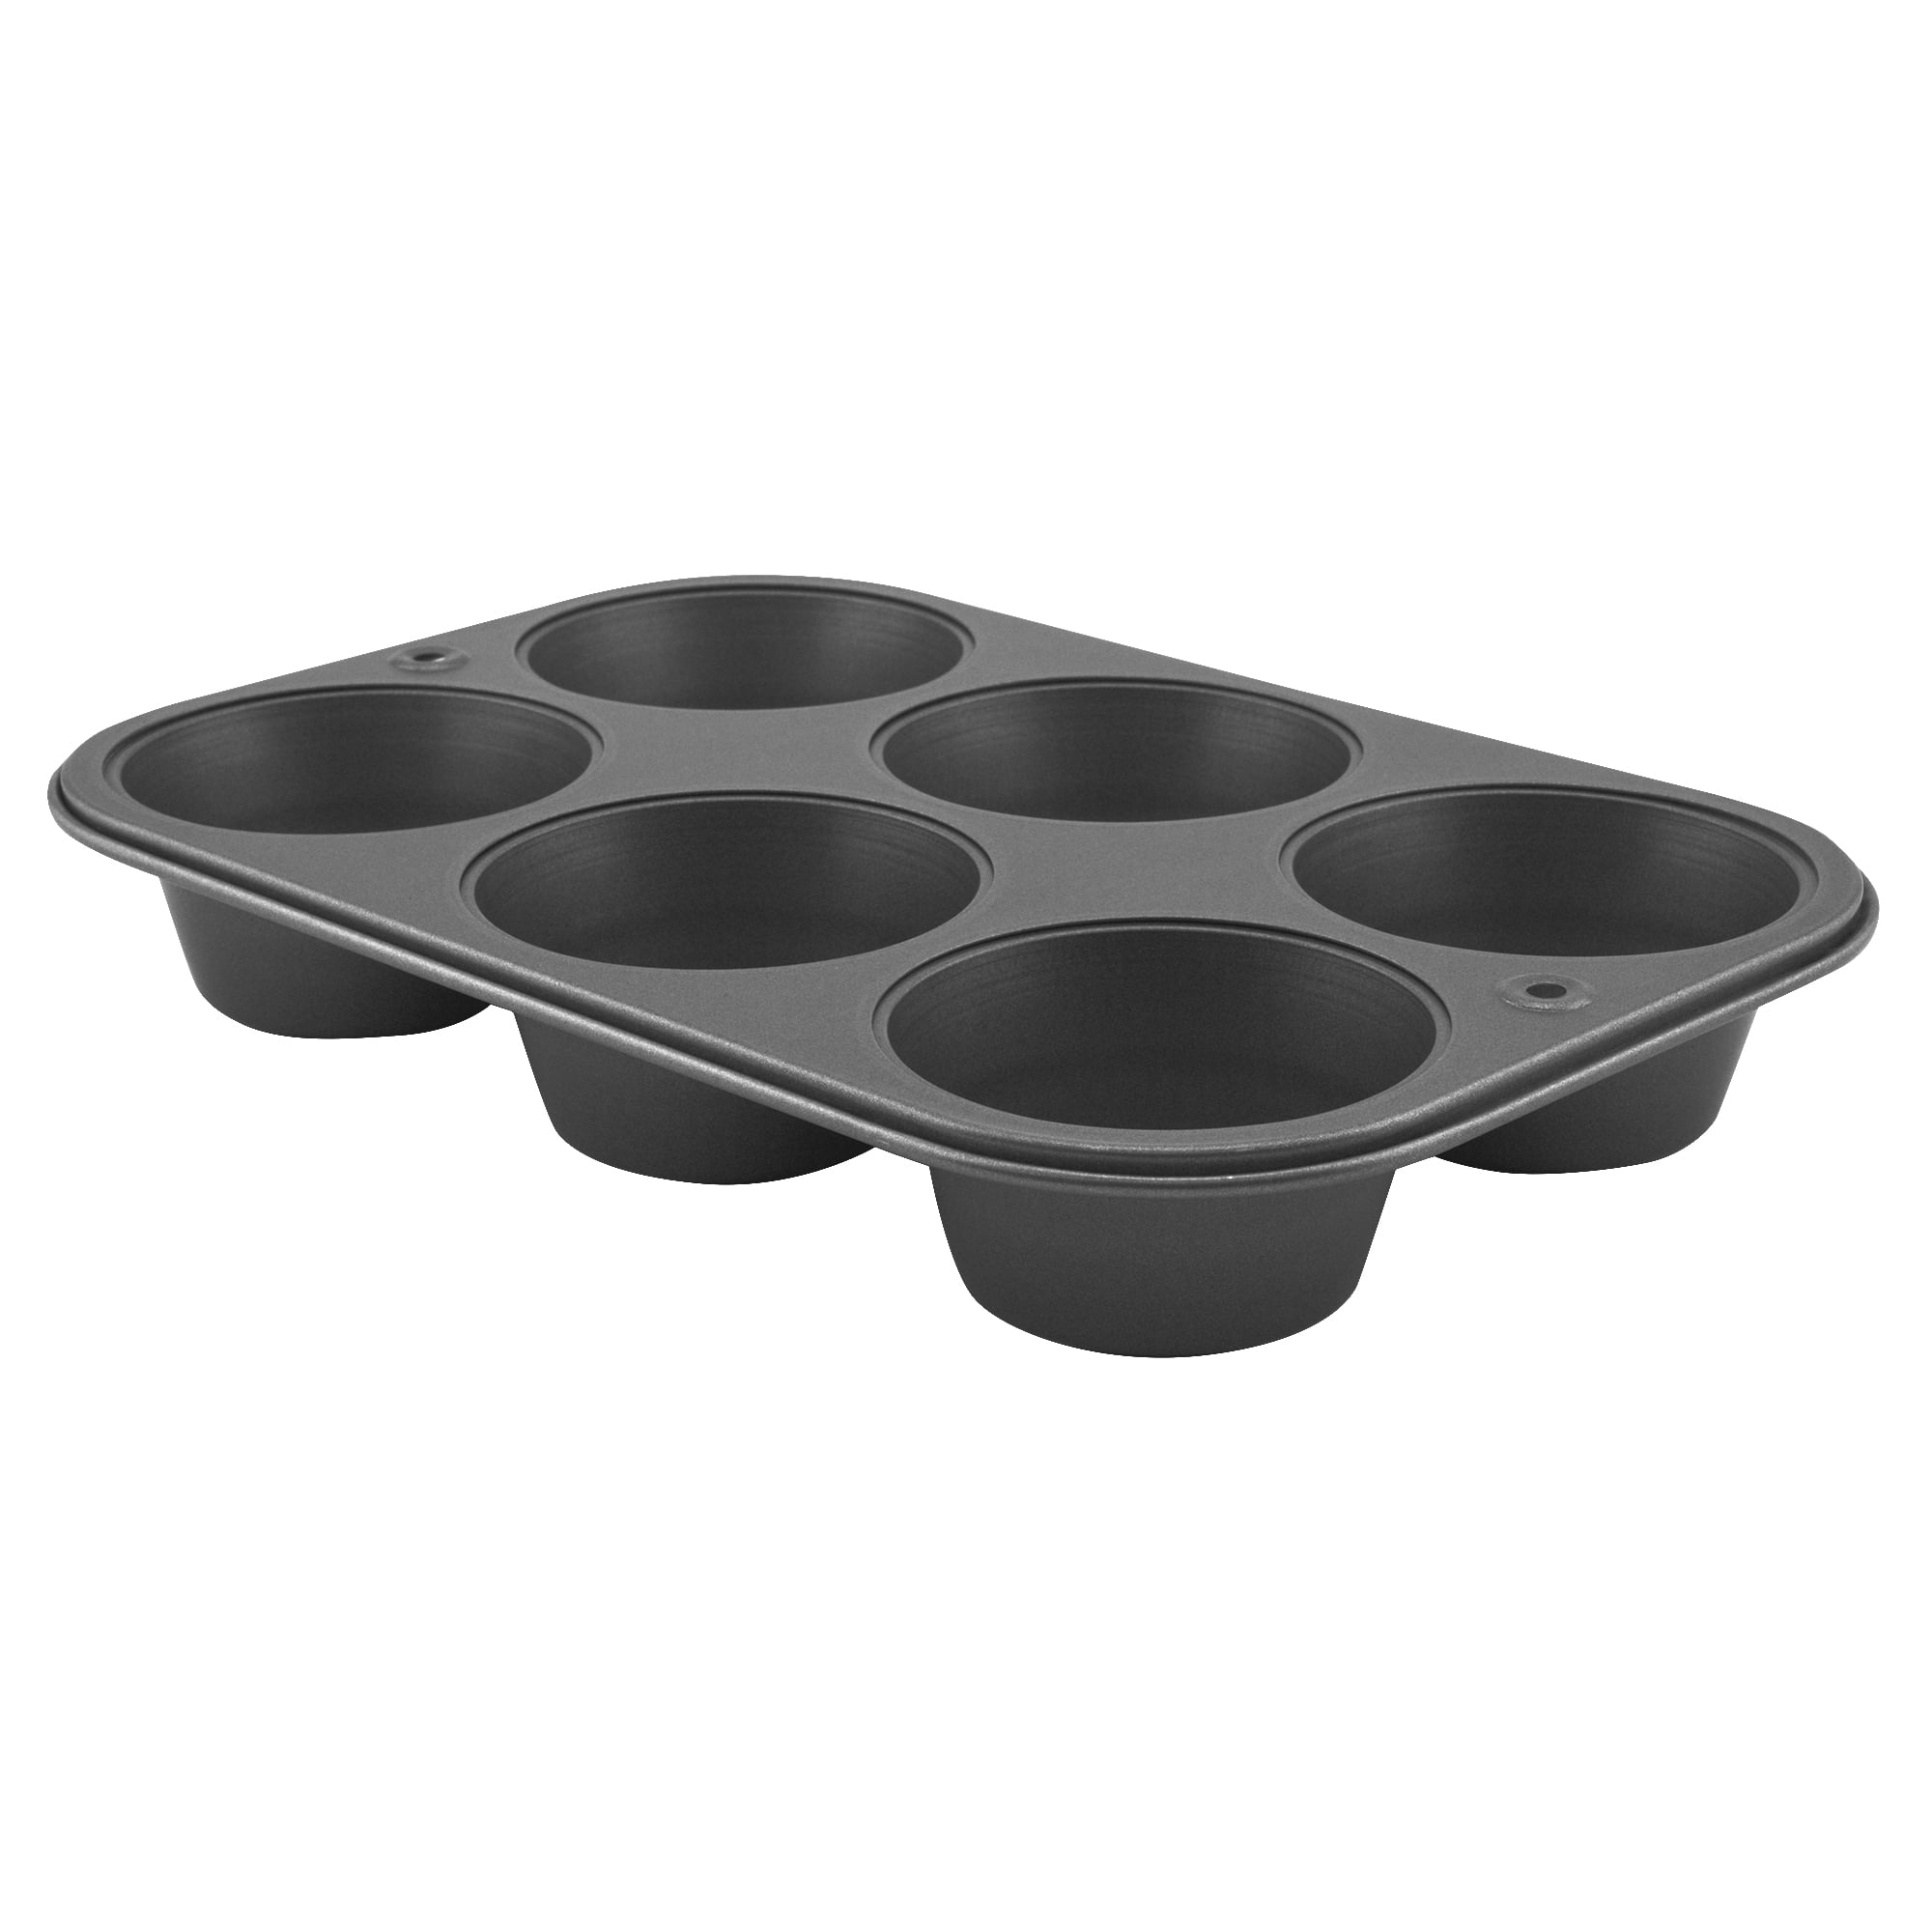 Baking Case Baking Mould Red Silicon Bakeware Non-Stick Giant Cupcake Tin Muffin Tray 6 Cup Large Silicone Muffins Pan